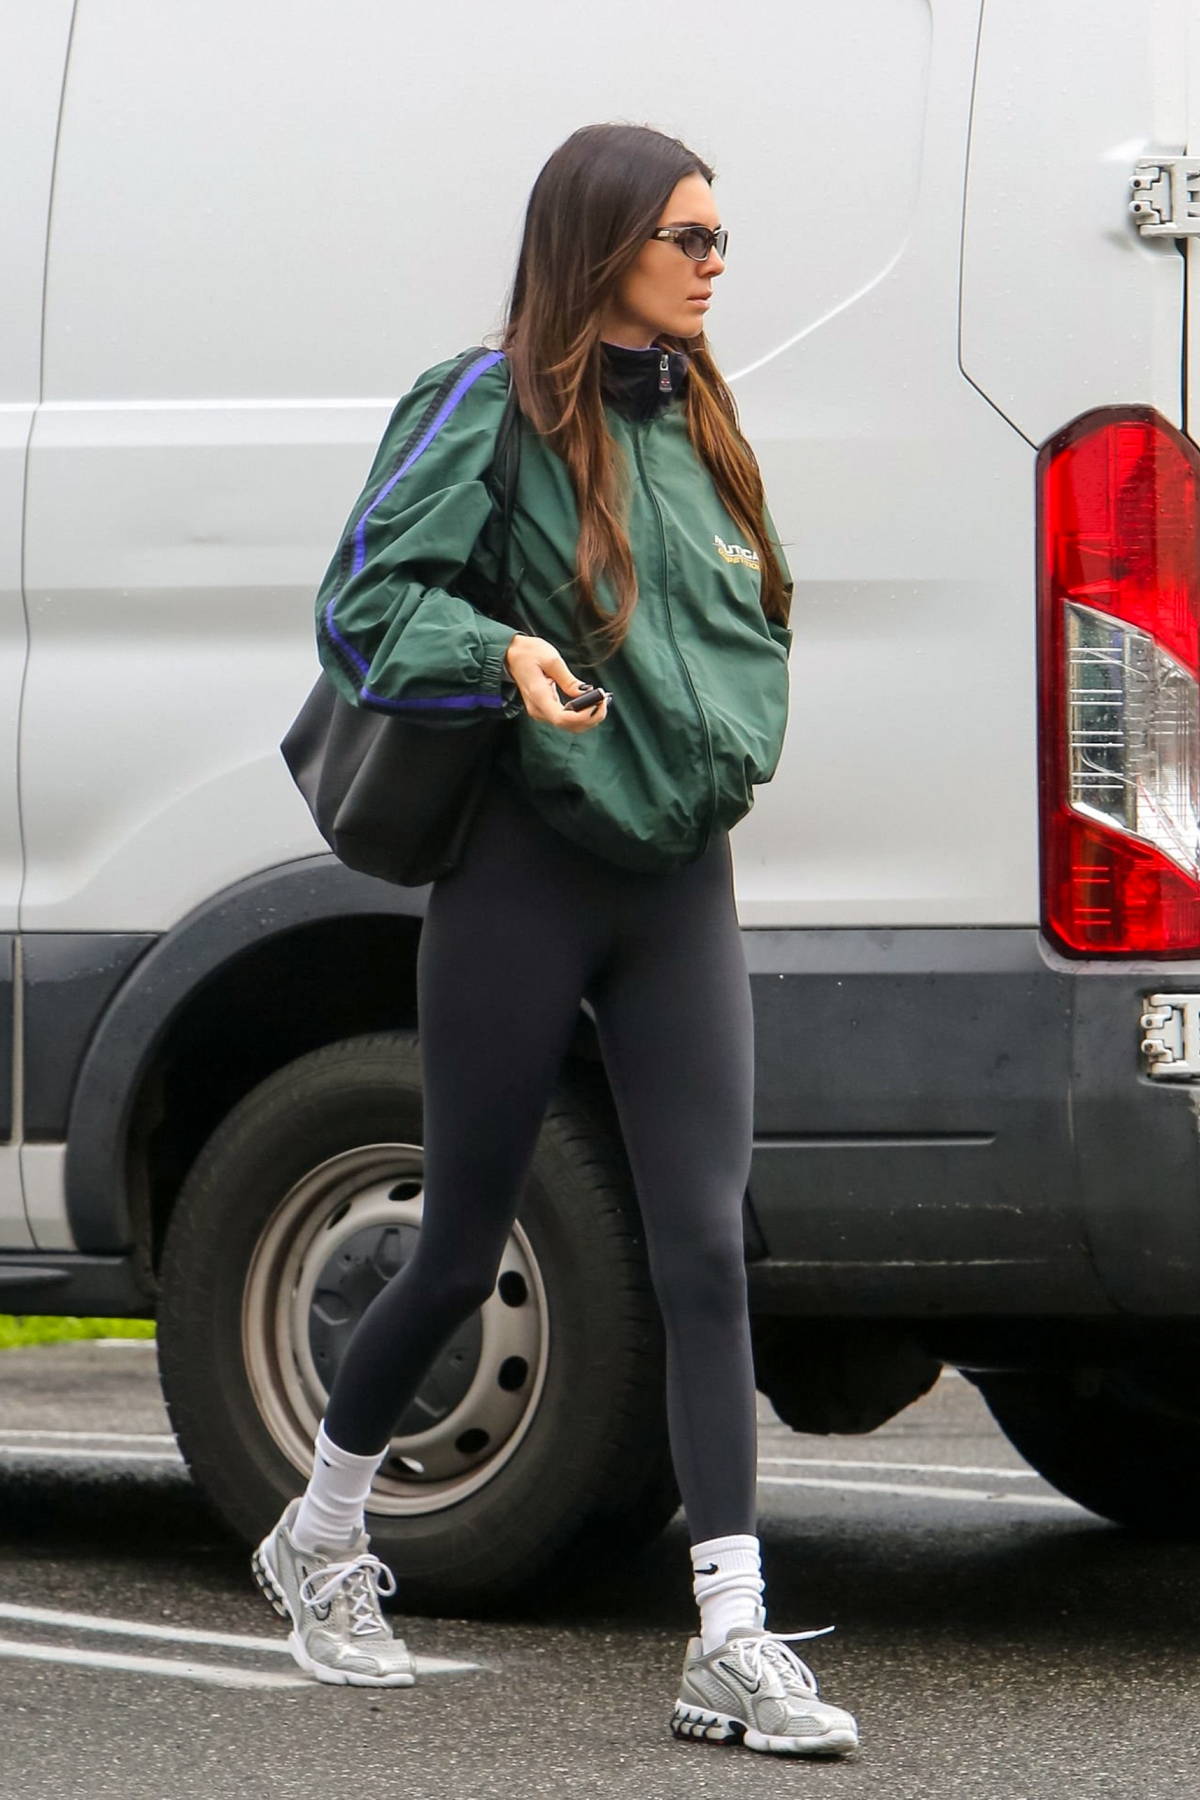 https://www.celebsfirst.com/wp-content/uploads/2023/01/kendall-jenner-wears-a-green-nautica-jacket-and-black-leggings-while-attending-a-hot-yoga-class-in-west-hollywood-california-050123_2.jpg